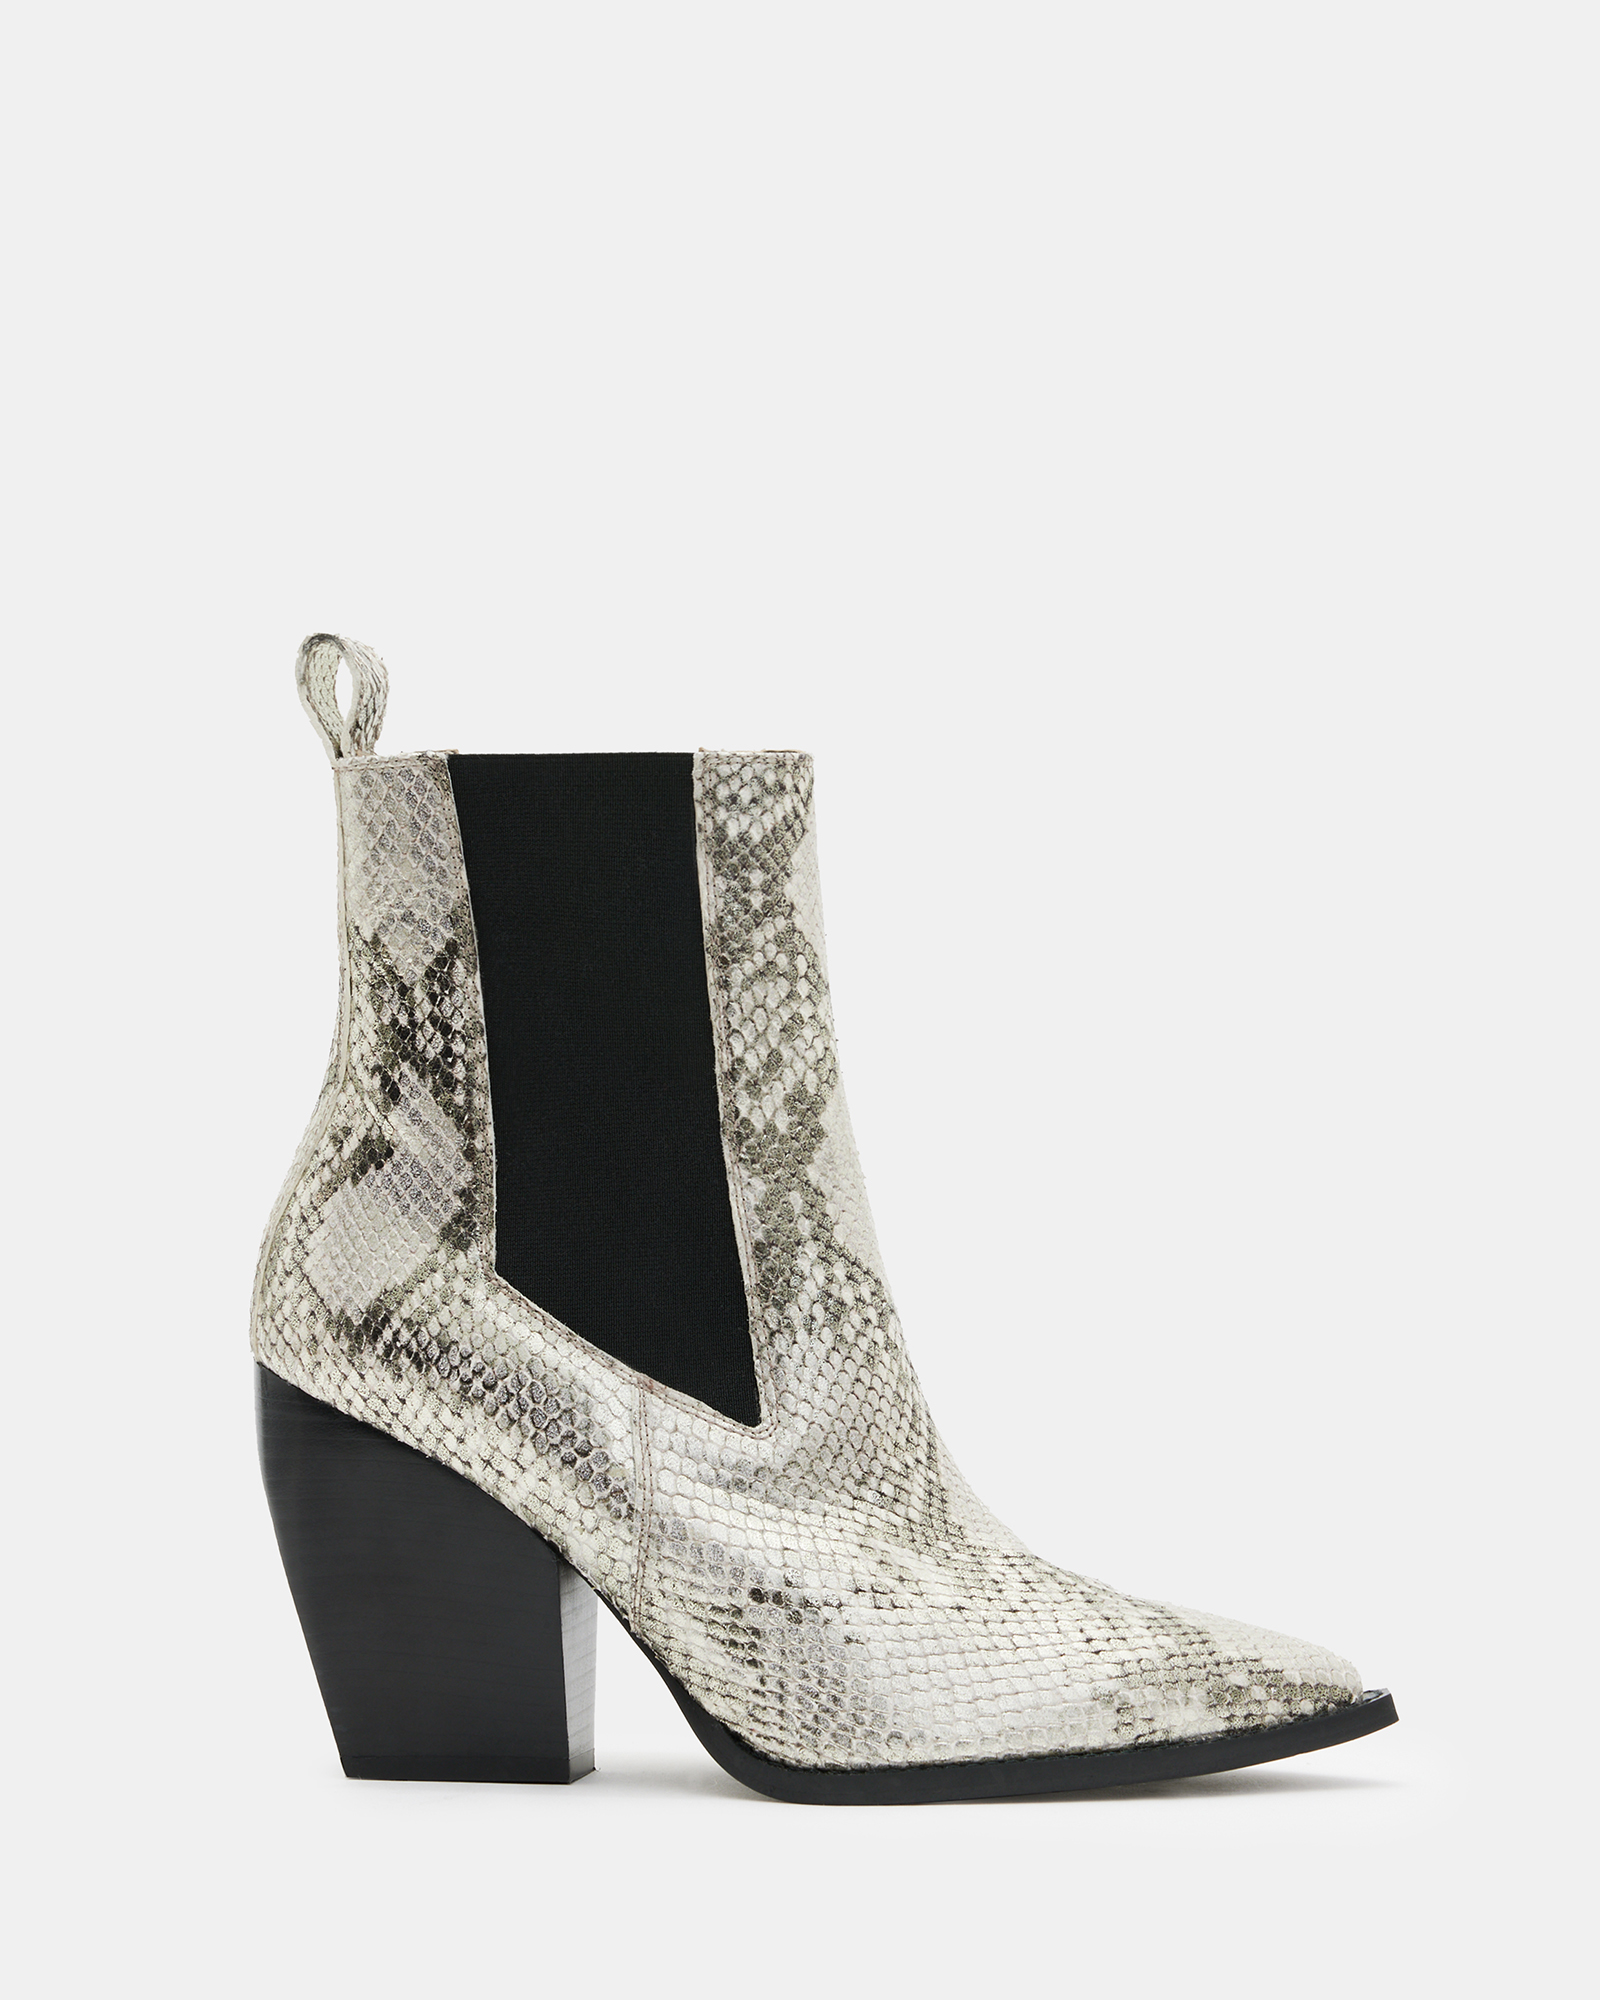 AllSaints Ria Pointed Snake Leather Boots,, METALLIC GOLD